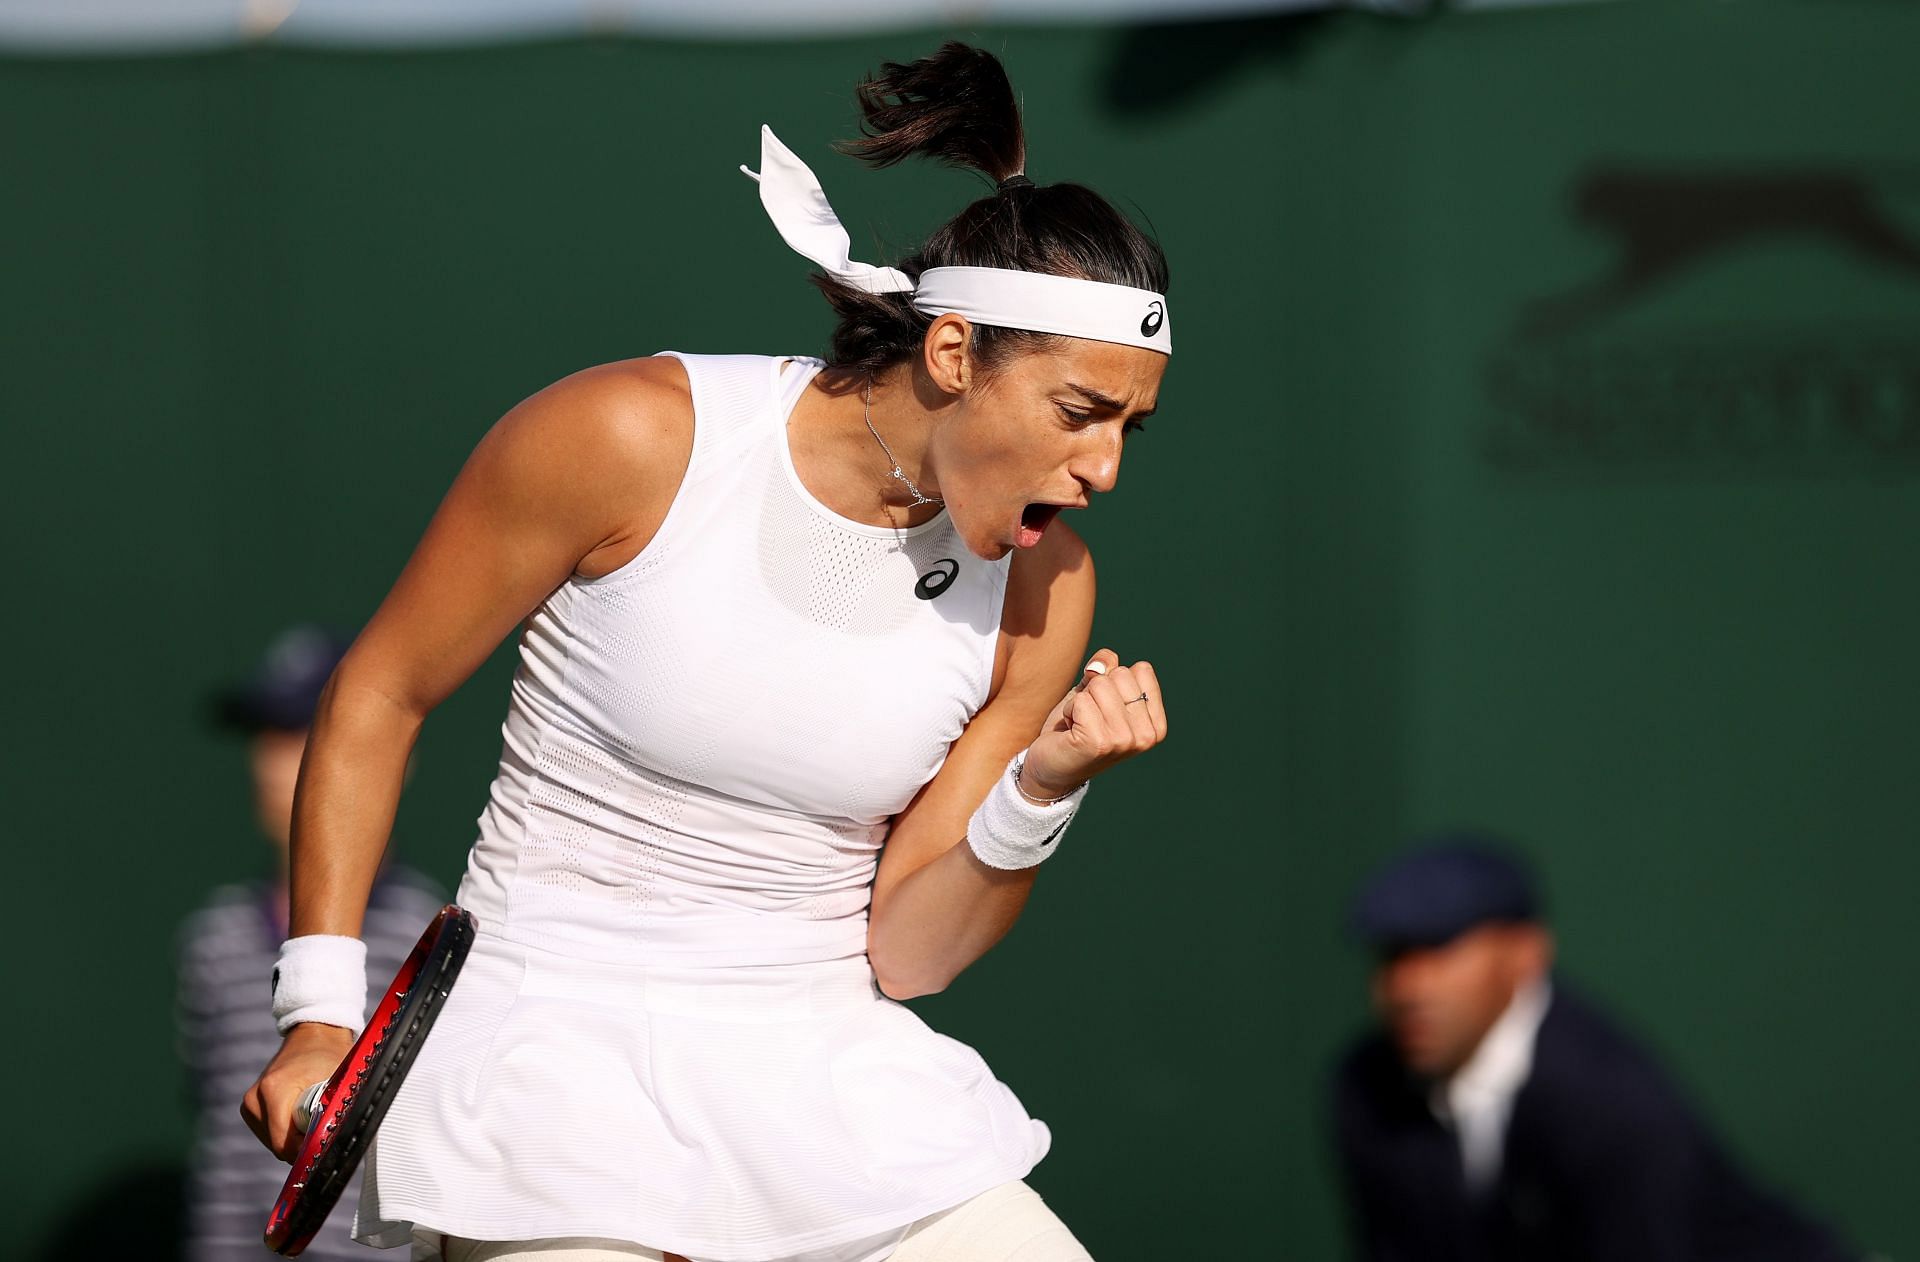 Caroline Garcia exults during her first-round match at the 2022 Wimbledon Championships